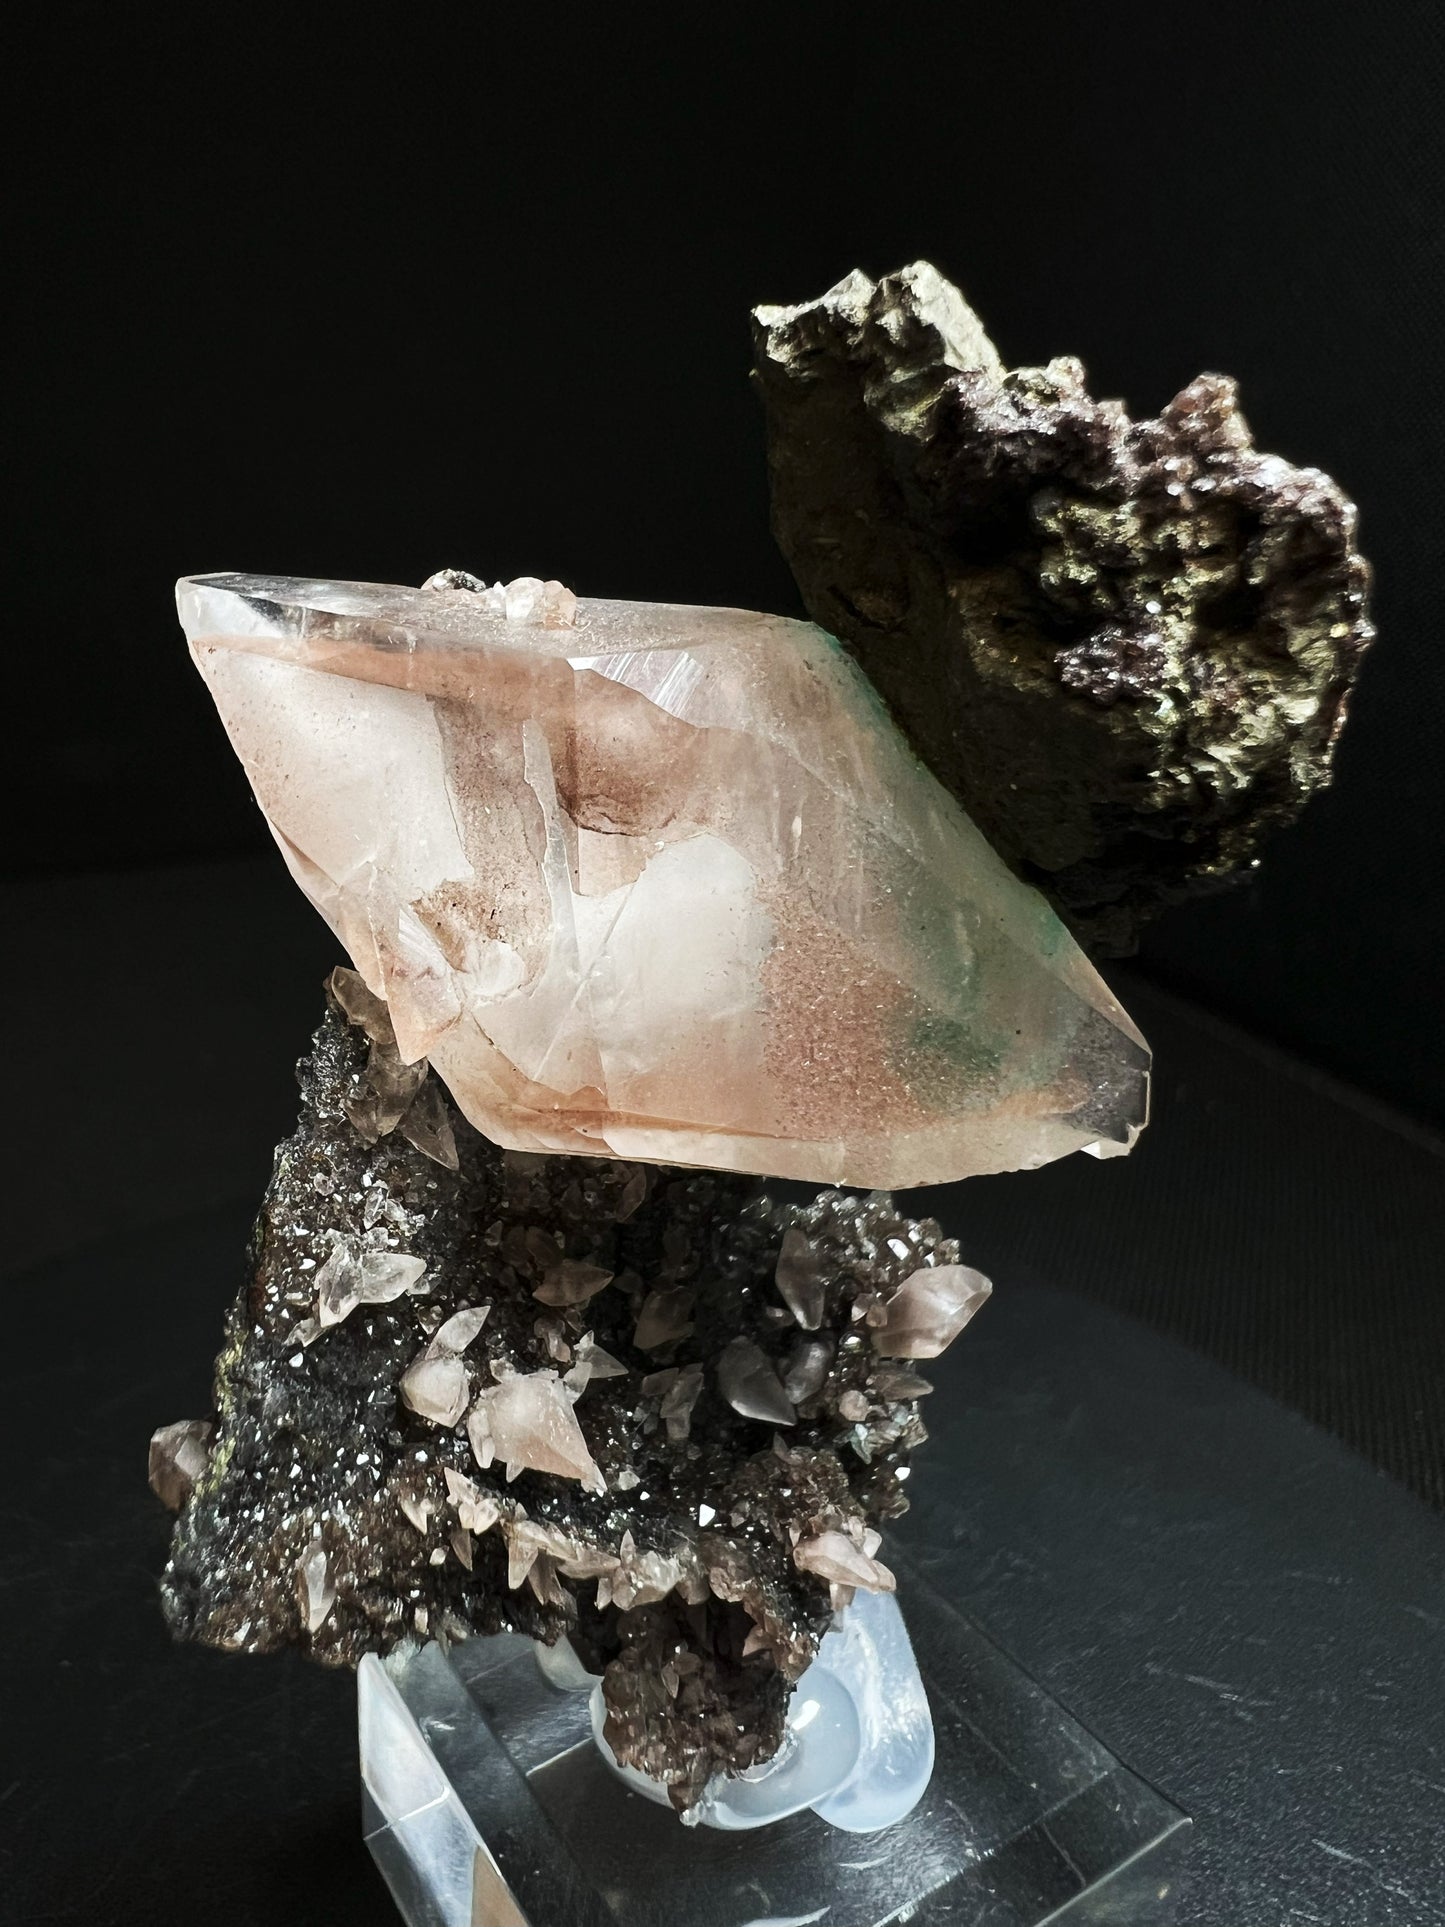 Outstanding Rare Museum Quality Pink & Green Calcite with Chalcopyrite On Matrix Perfect Specimen From Daye mine Hubei province China